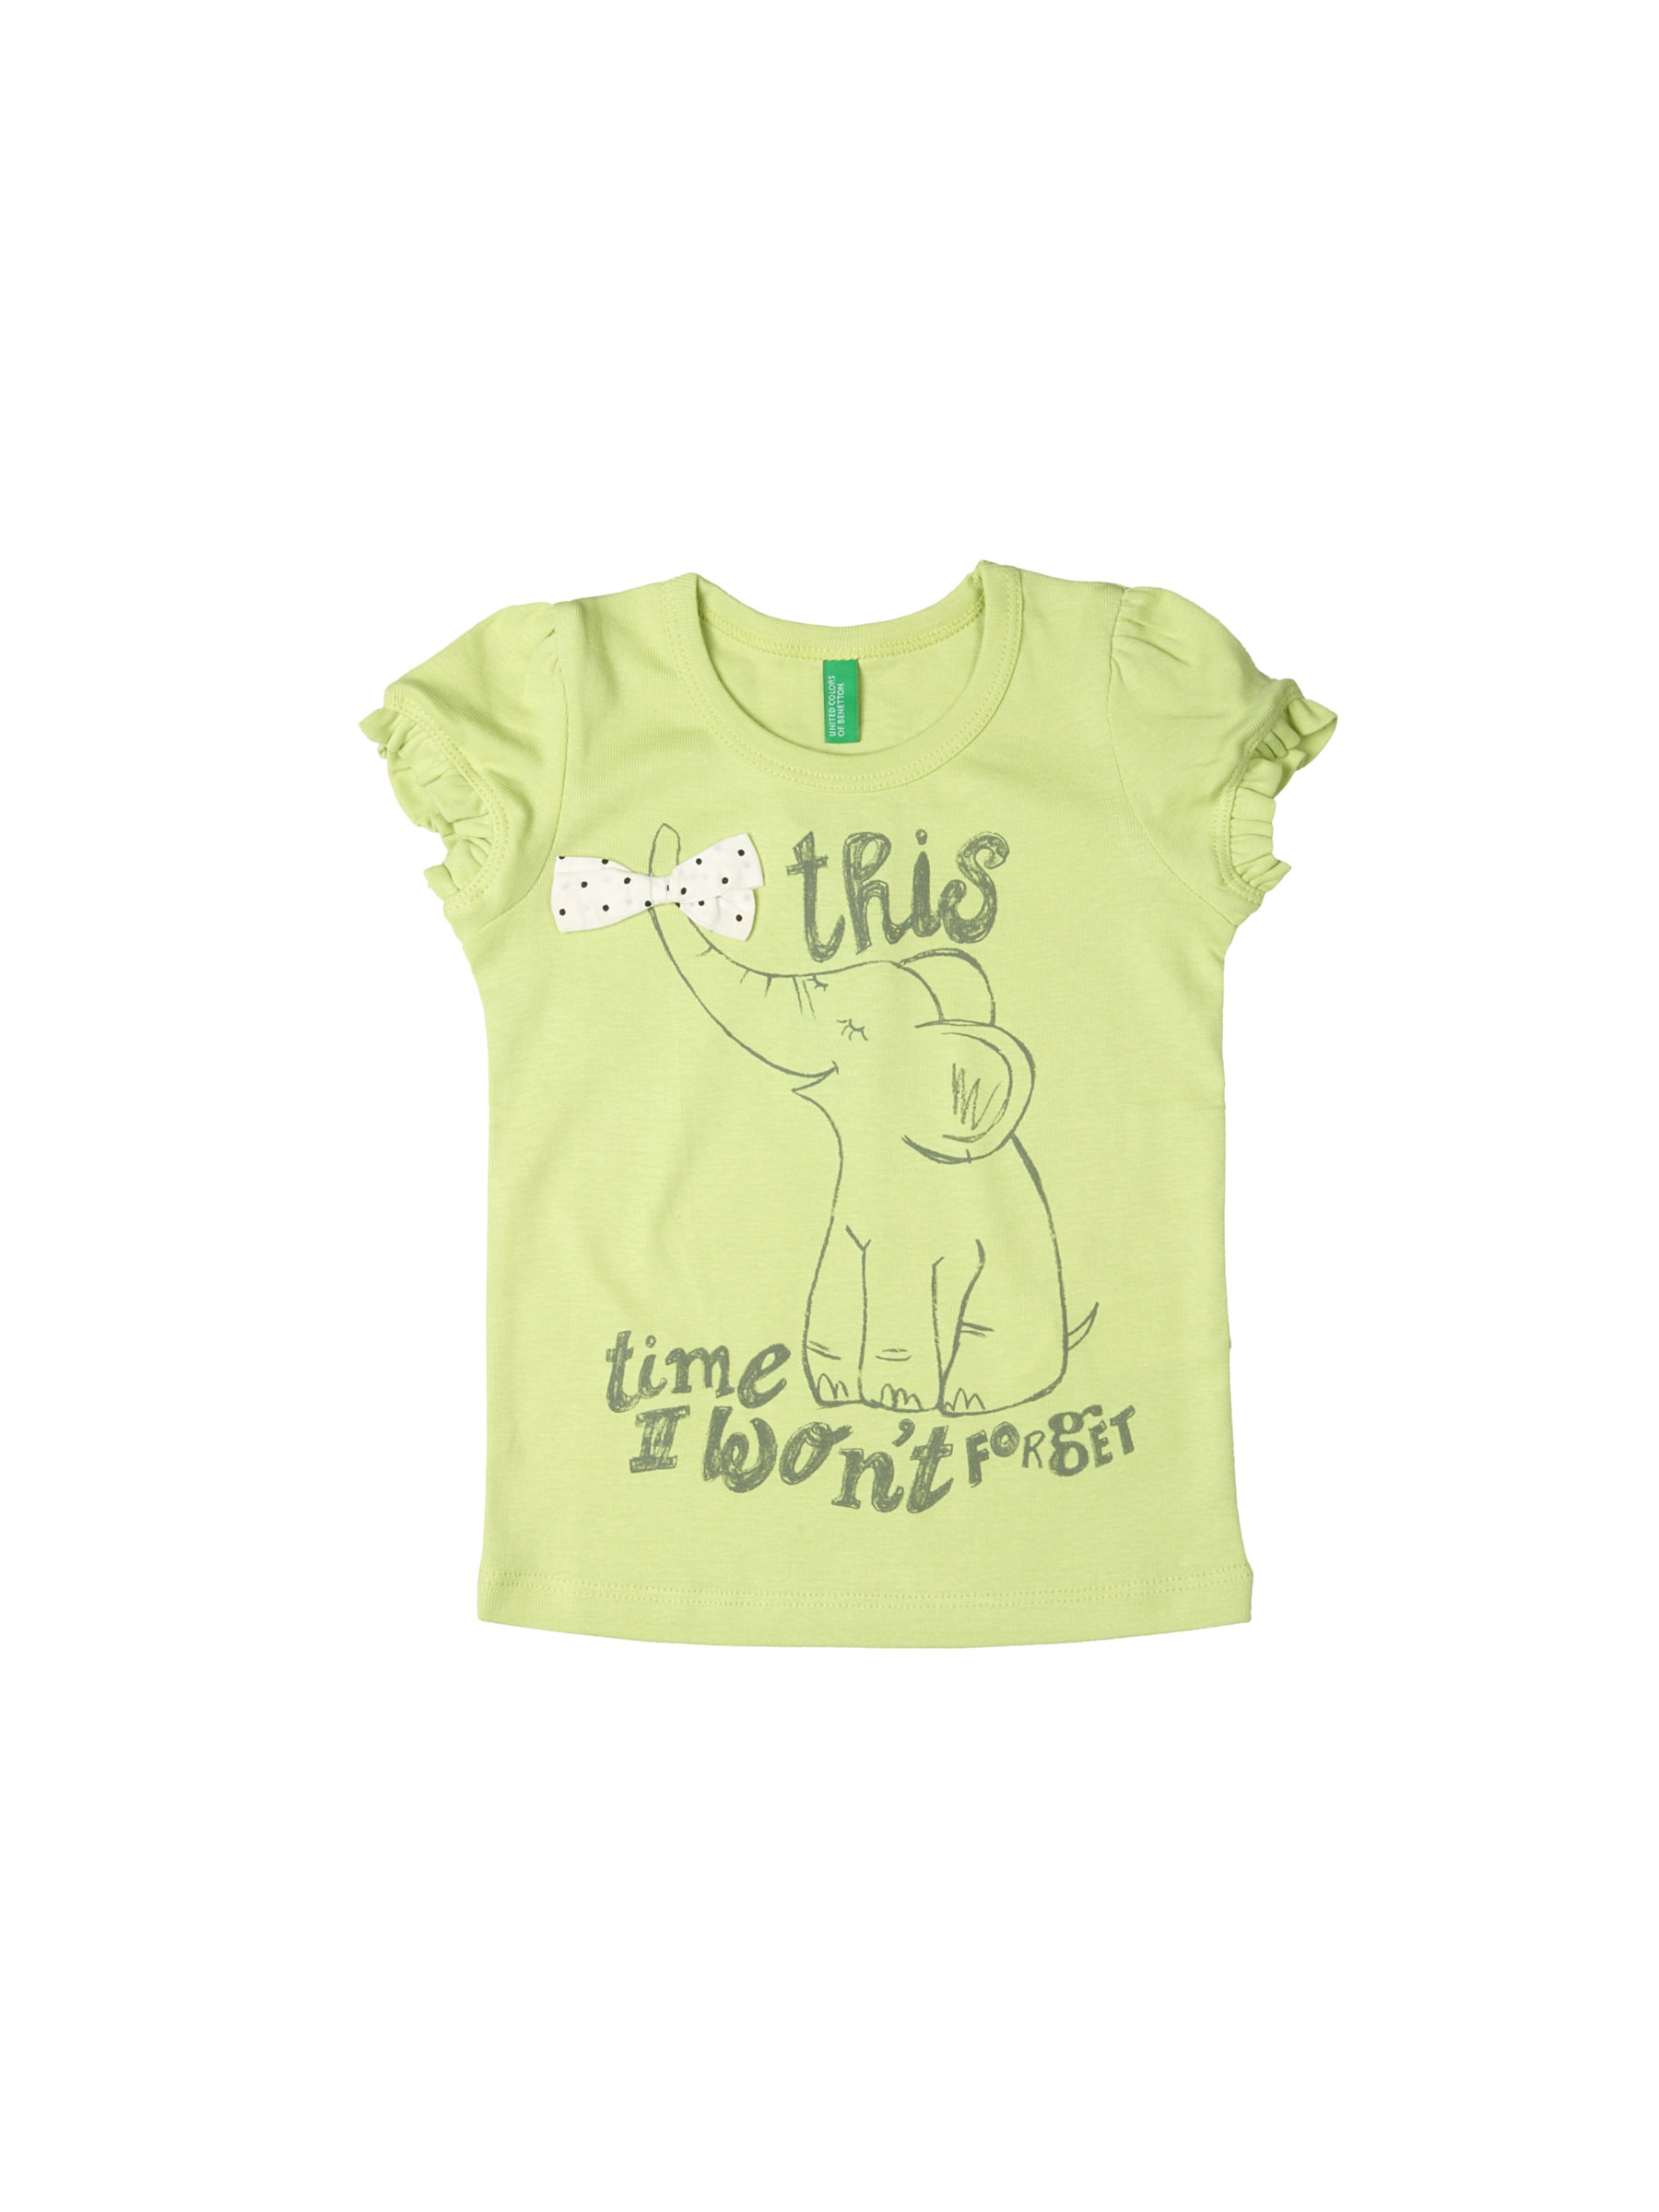 United Colors of Benetton Kids Girls Green Printed Top